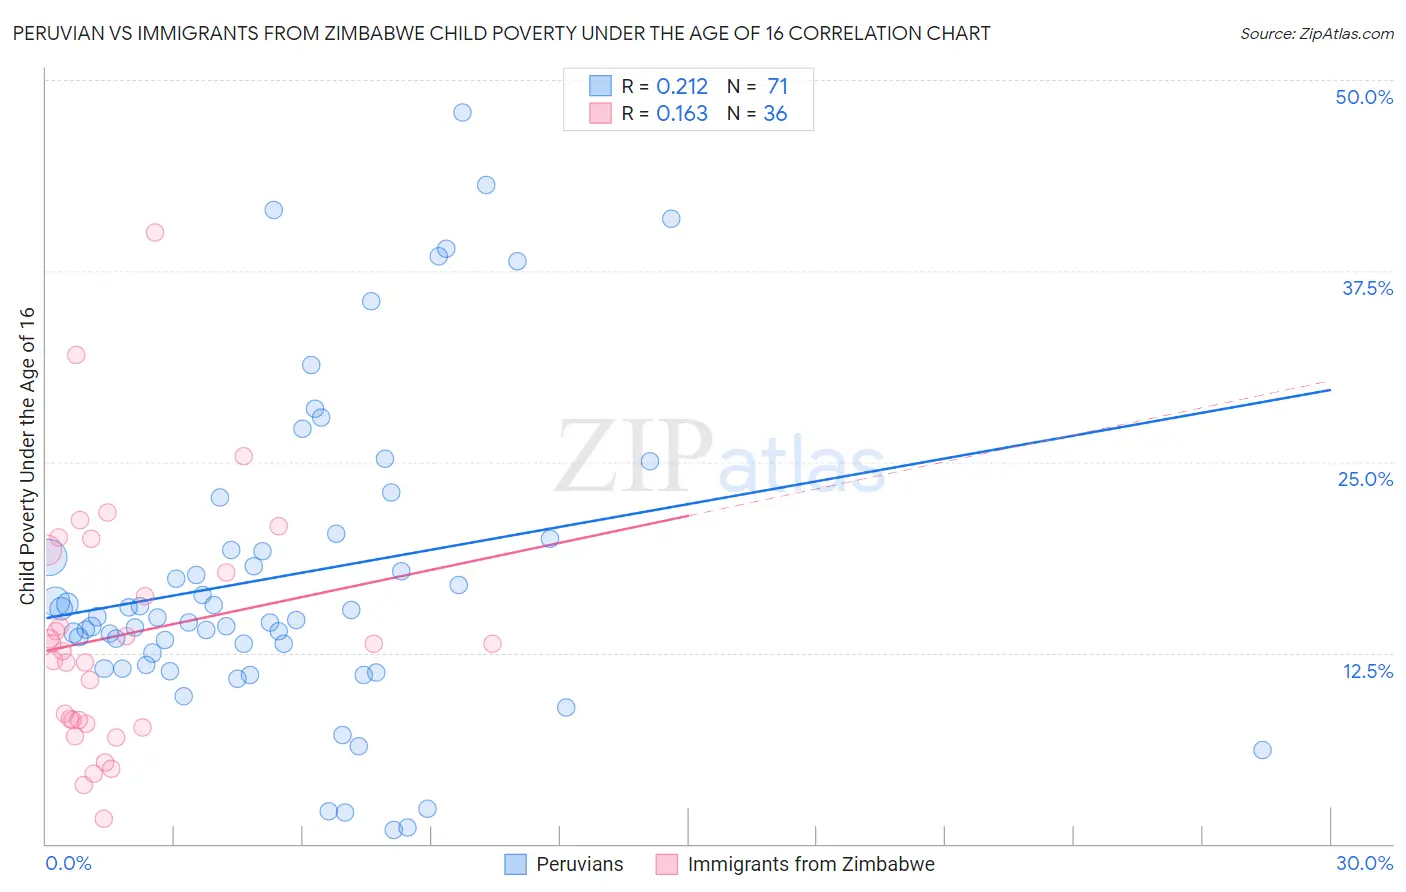 Peruvian vs Immigrants from Zimbabwe Child Poverty Under the Age of 16